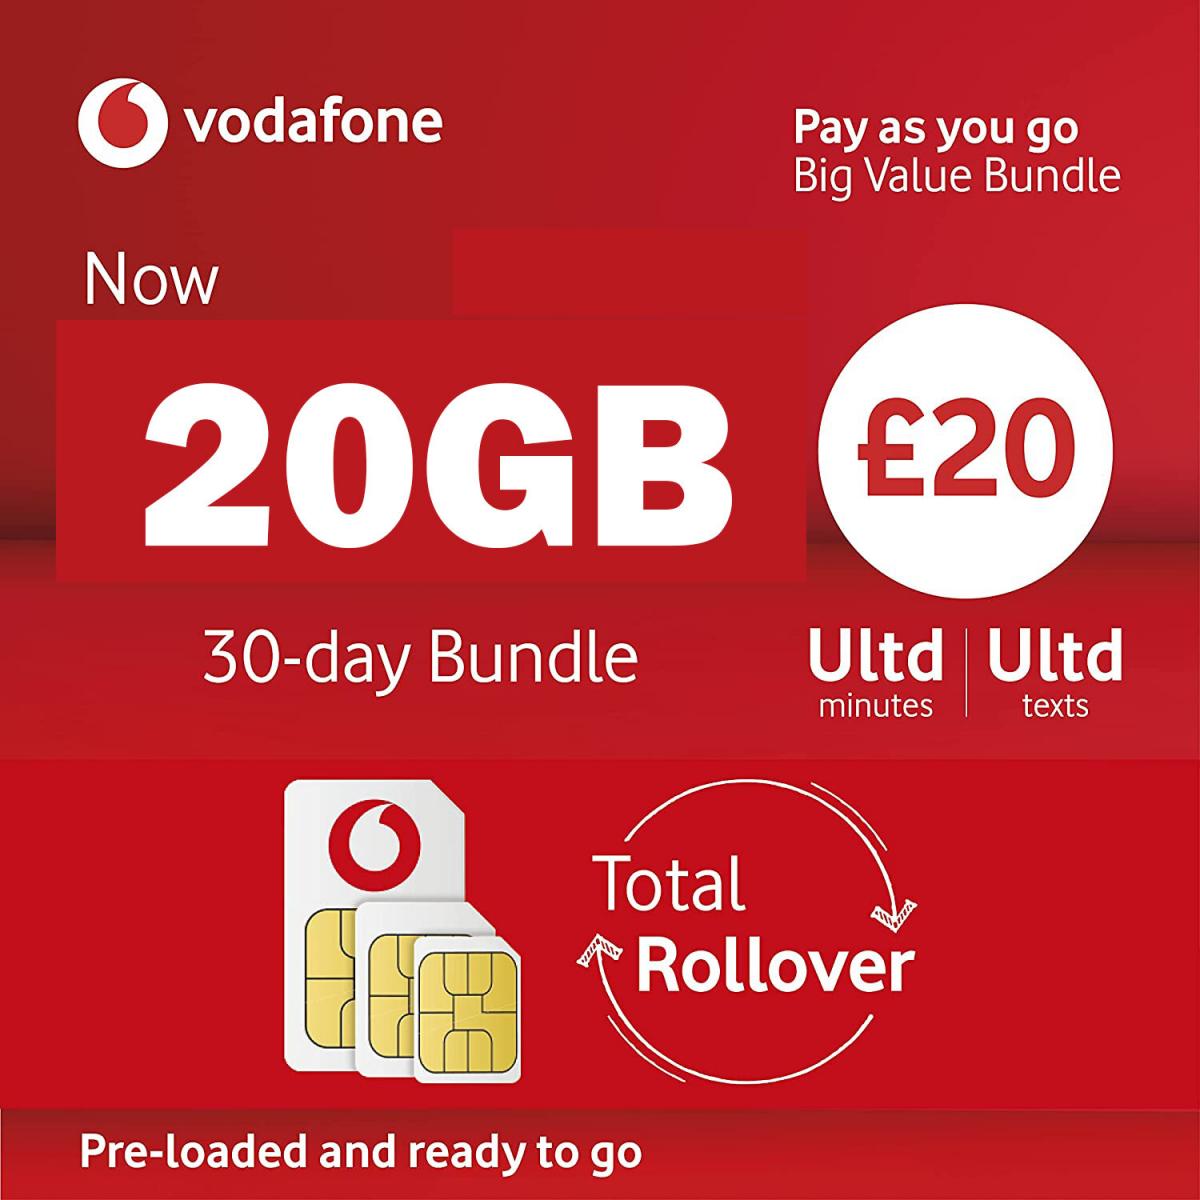 Vodafone Sim Card Package Included Unlimited Data Calls SMS Pay As you Go - £20-20GB Data Unlimited Calls & Text